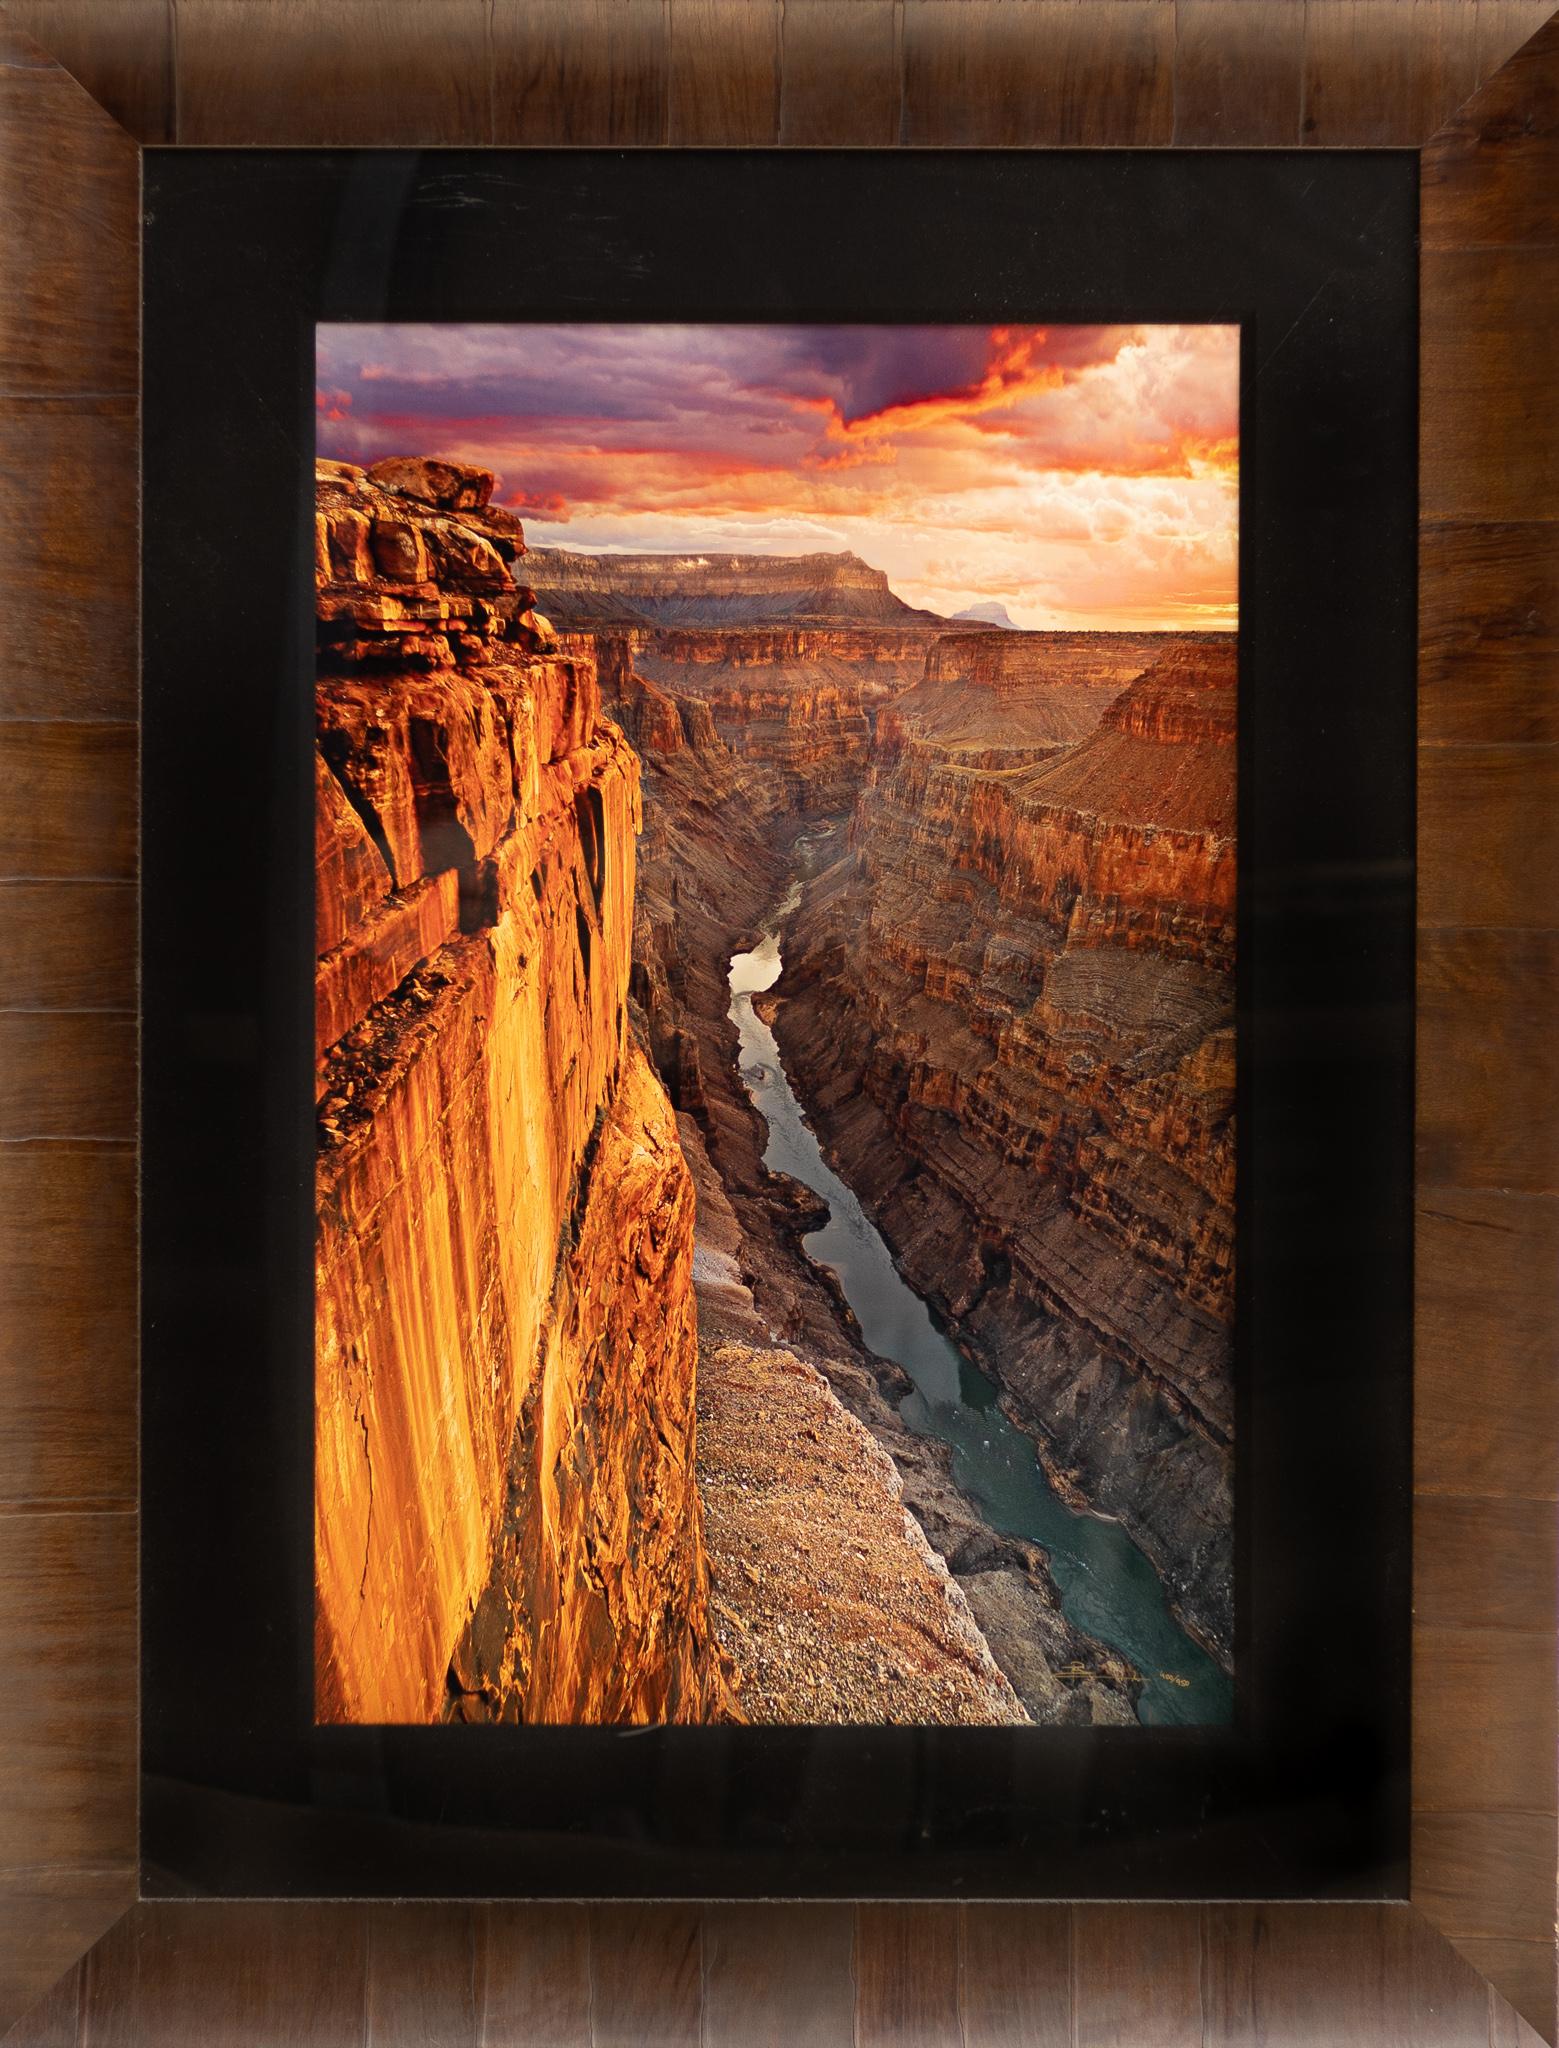 Edge of Time, Edition 400/950 - Photograph by Peter Lik